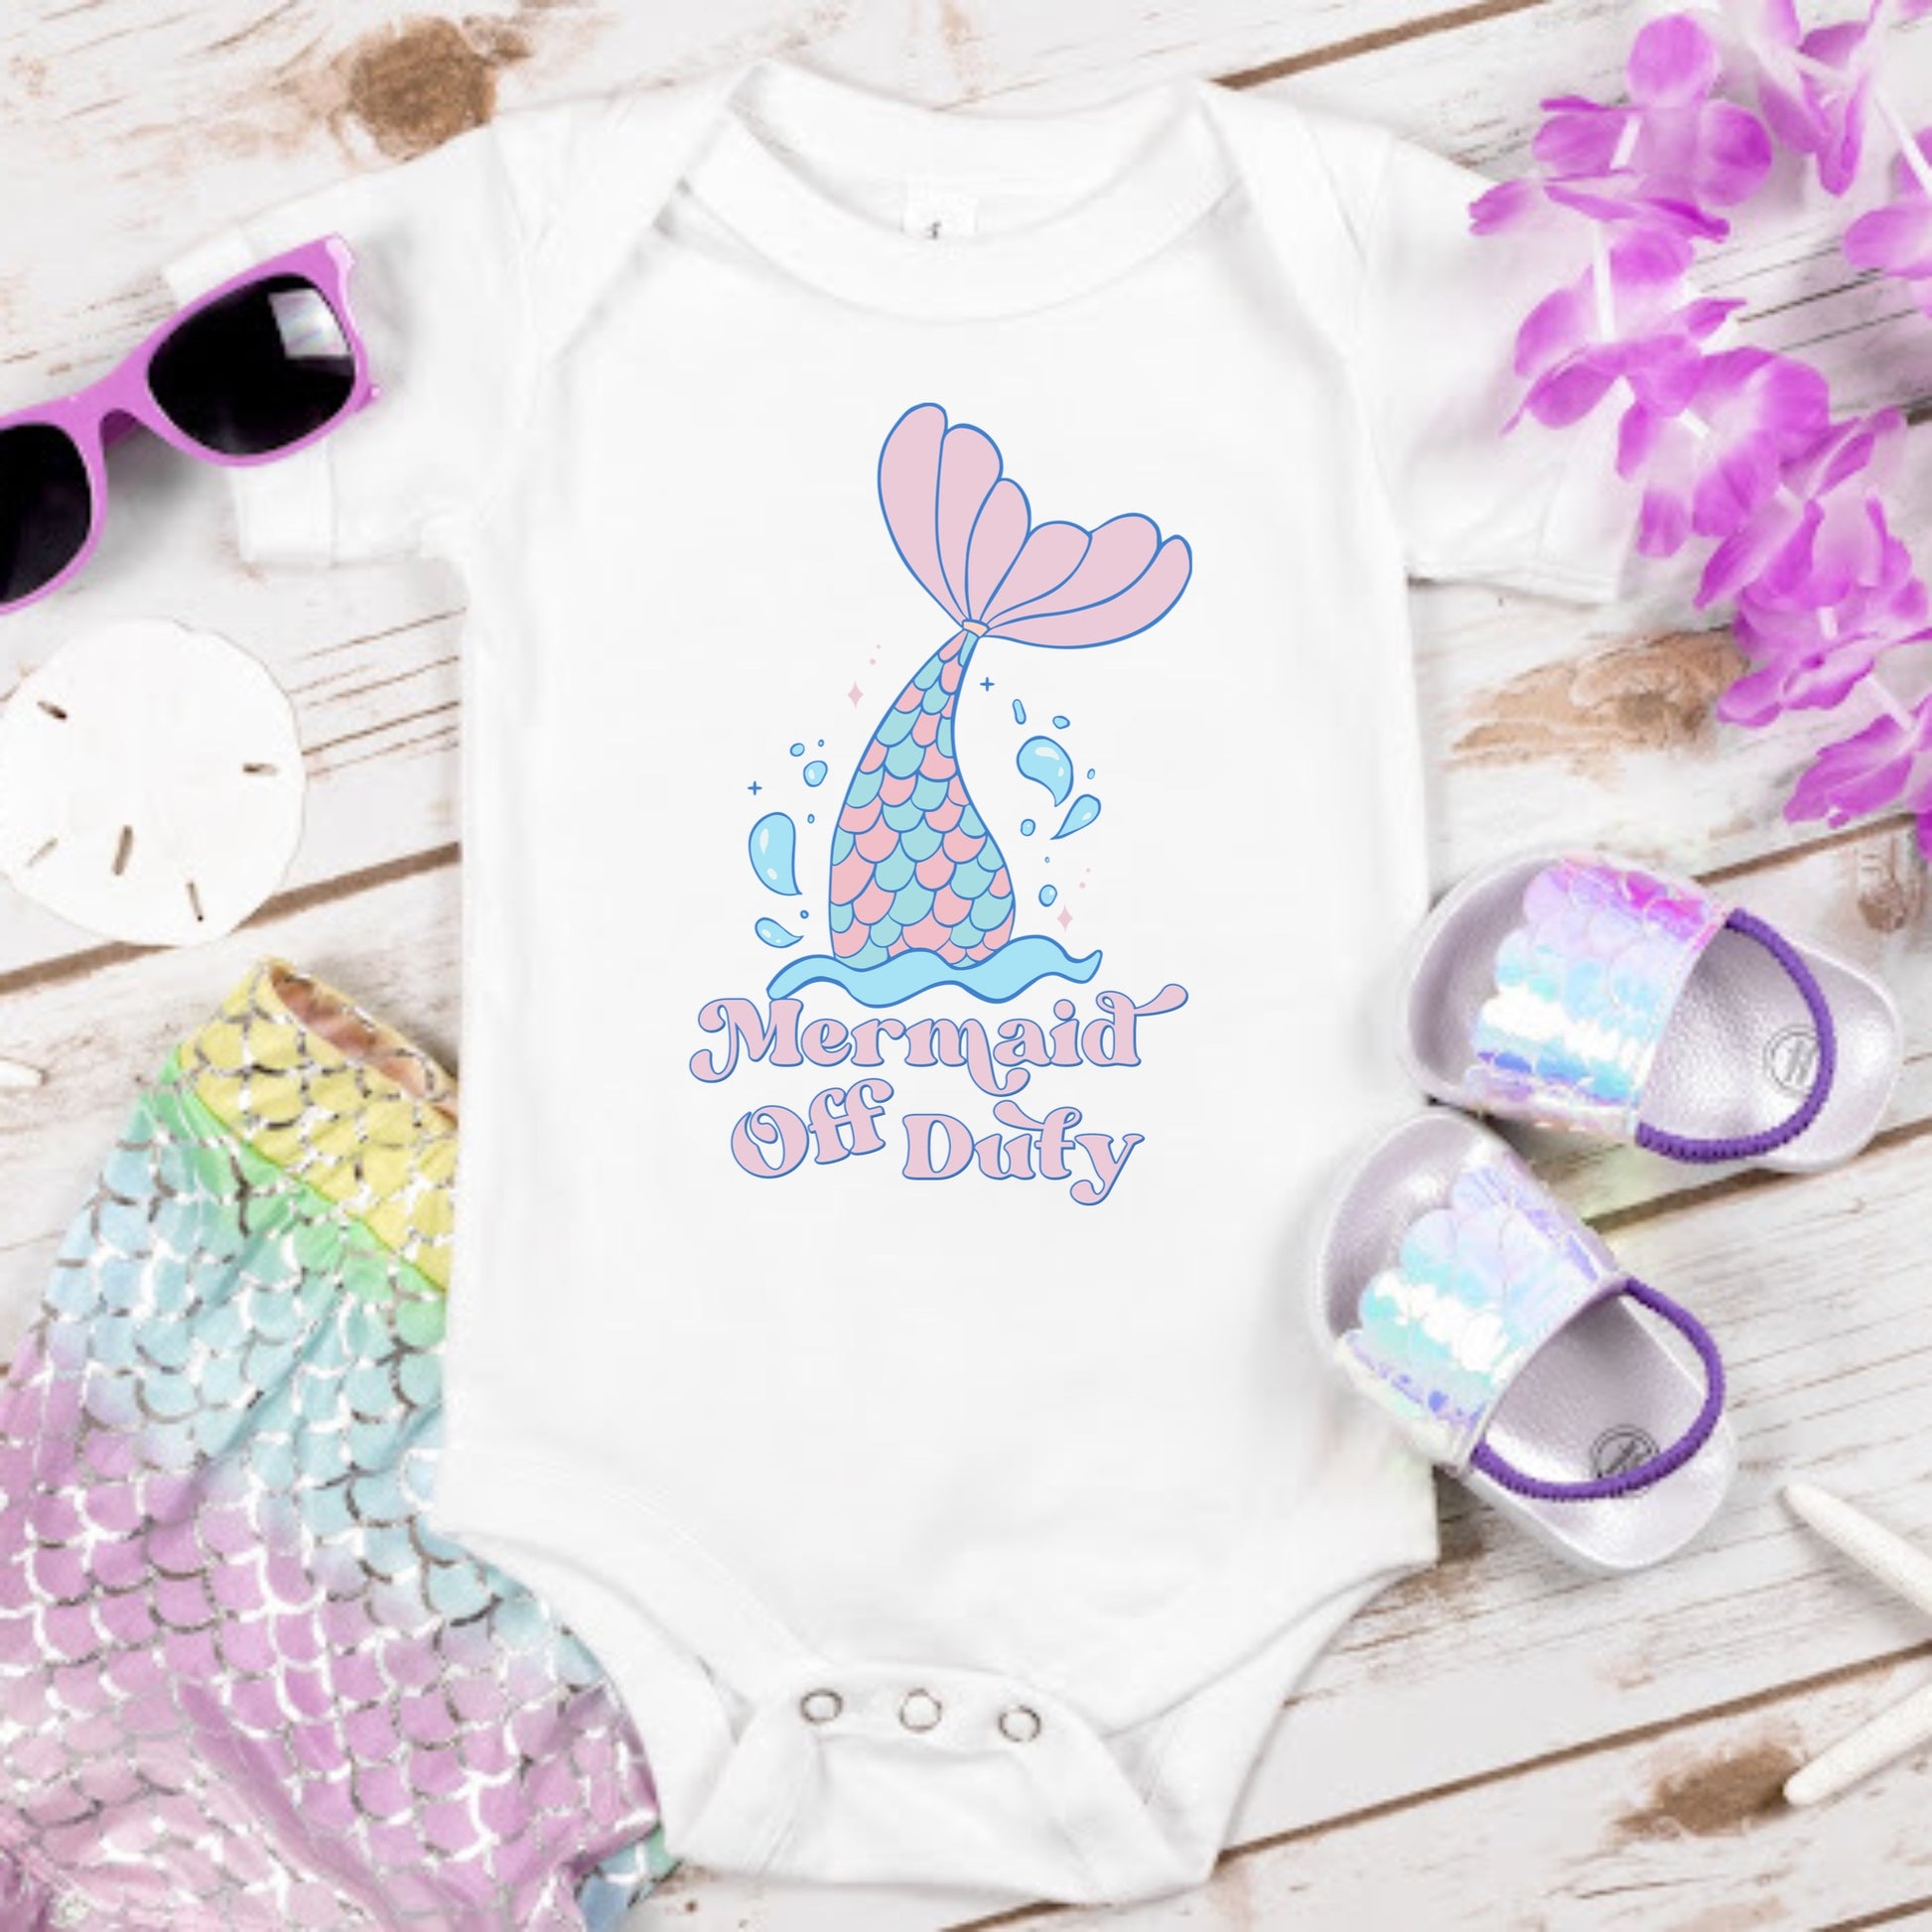 Mermaid tail in water and the phrase "Mermaid Off Duty" Iron On Heat transfer 